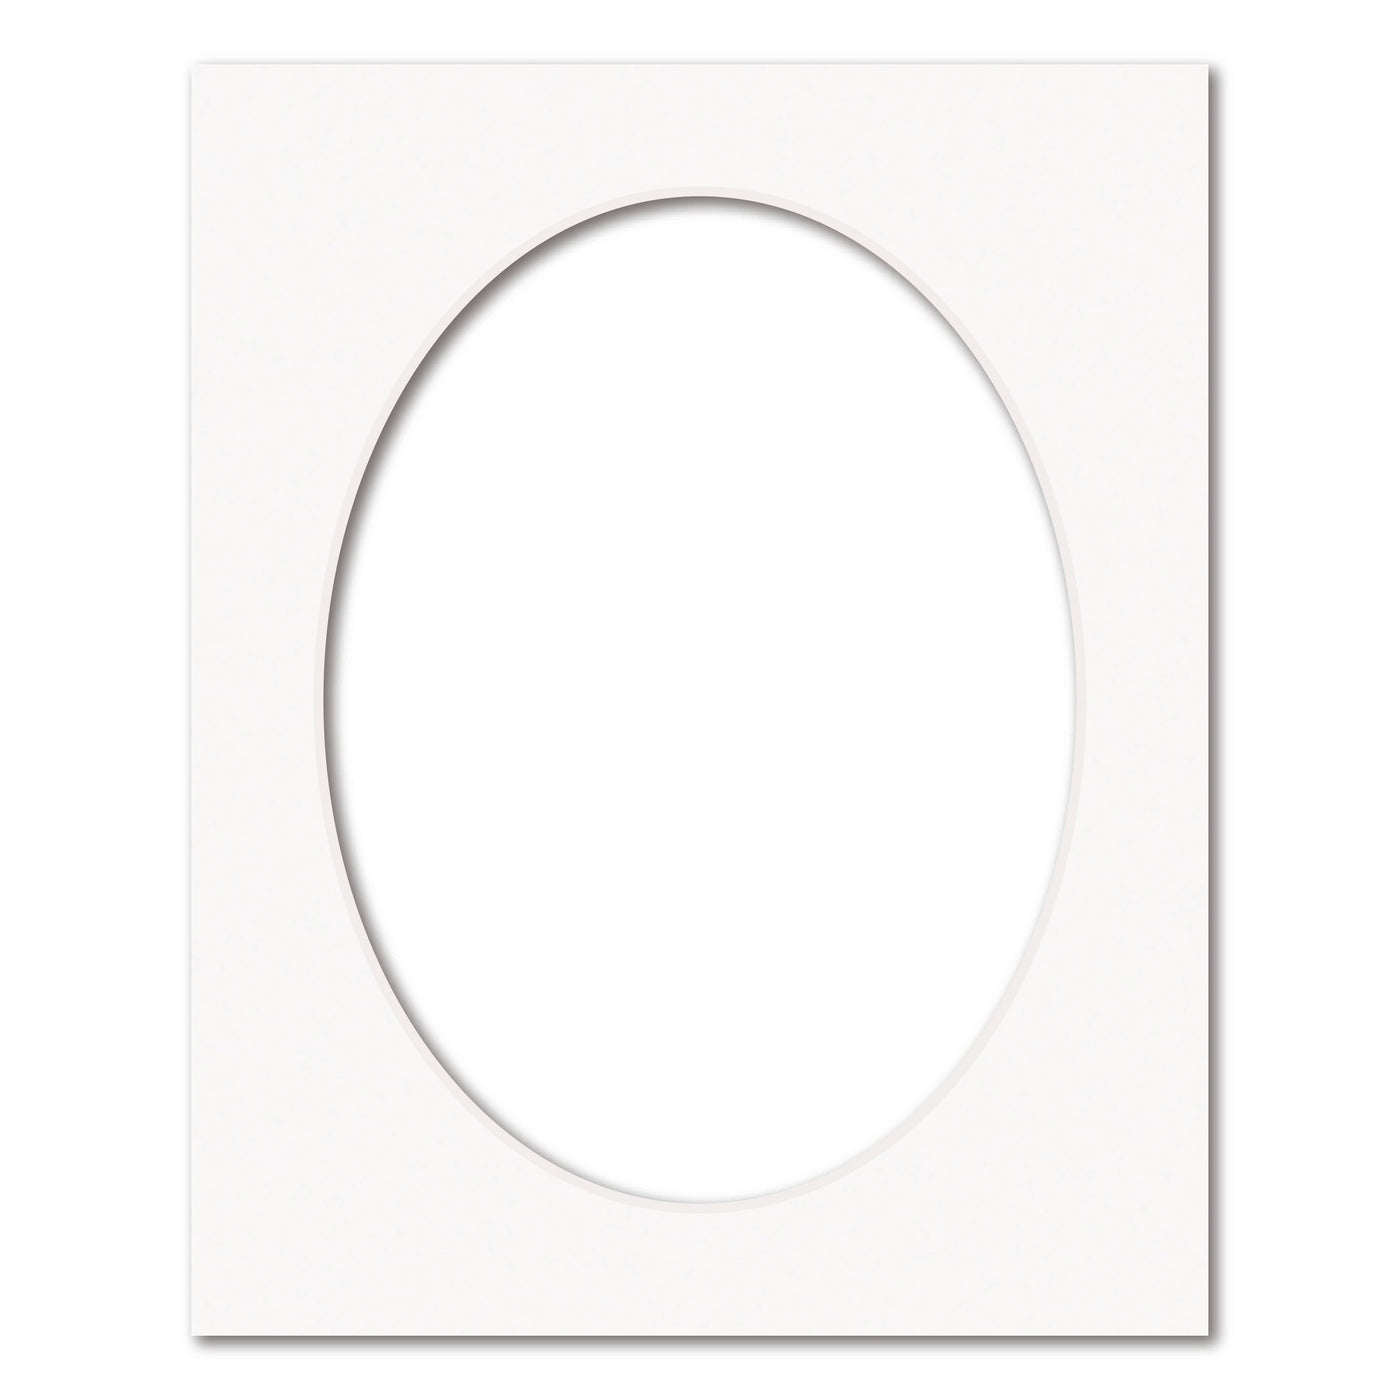 Ice White Acid-Free Oval Mat Board 8x10in (20.3x25.4cm) to suit 6x8in (15x20cm) image from our Custom Cut Mat Boards collection by Profile Products (Australia) Pty Ltd